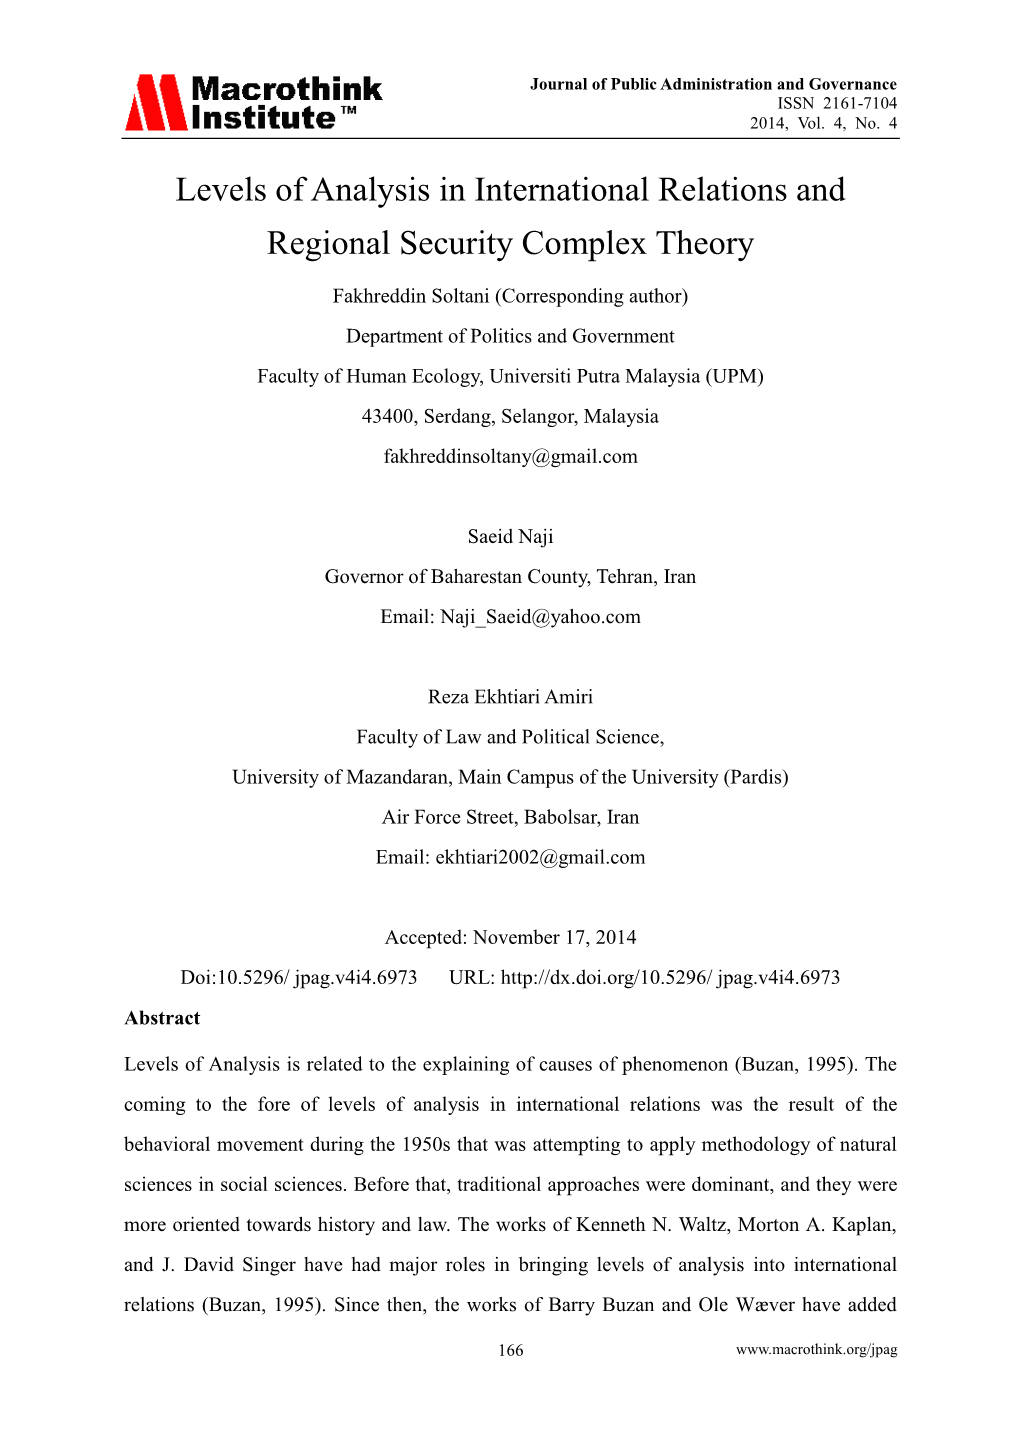 Levels of Analysis in International Relations and Regional Security Complex Theory